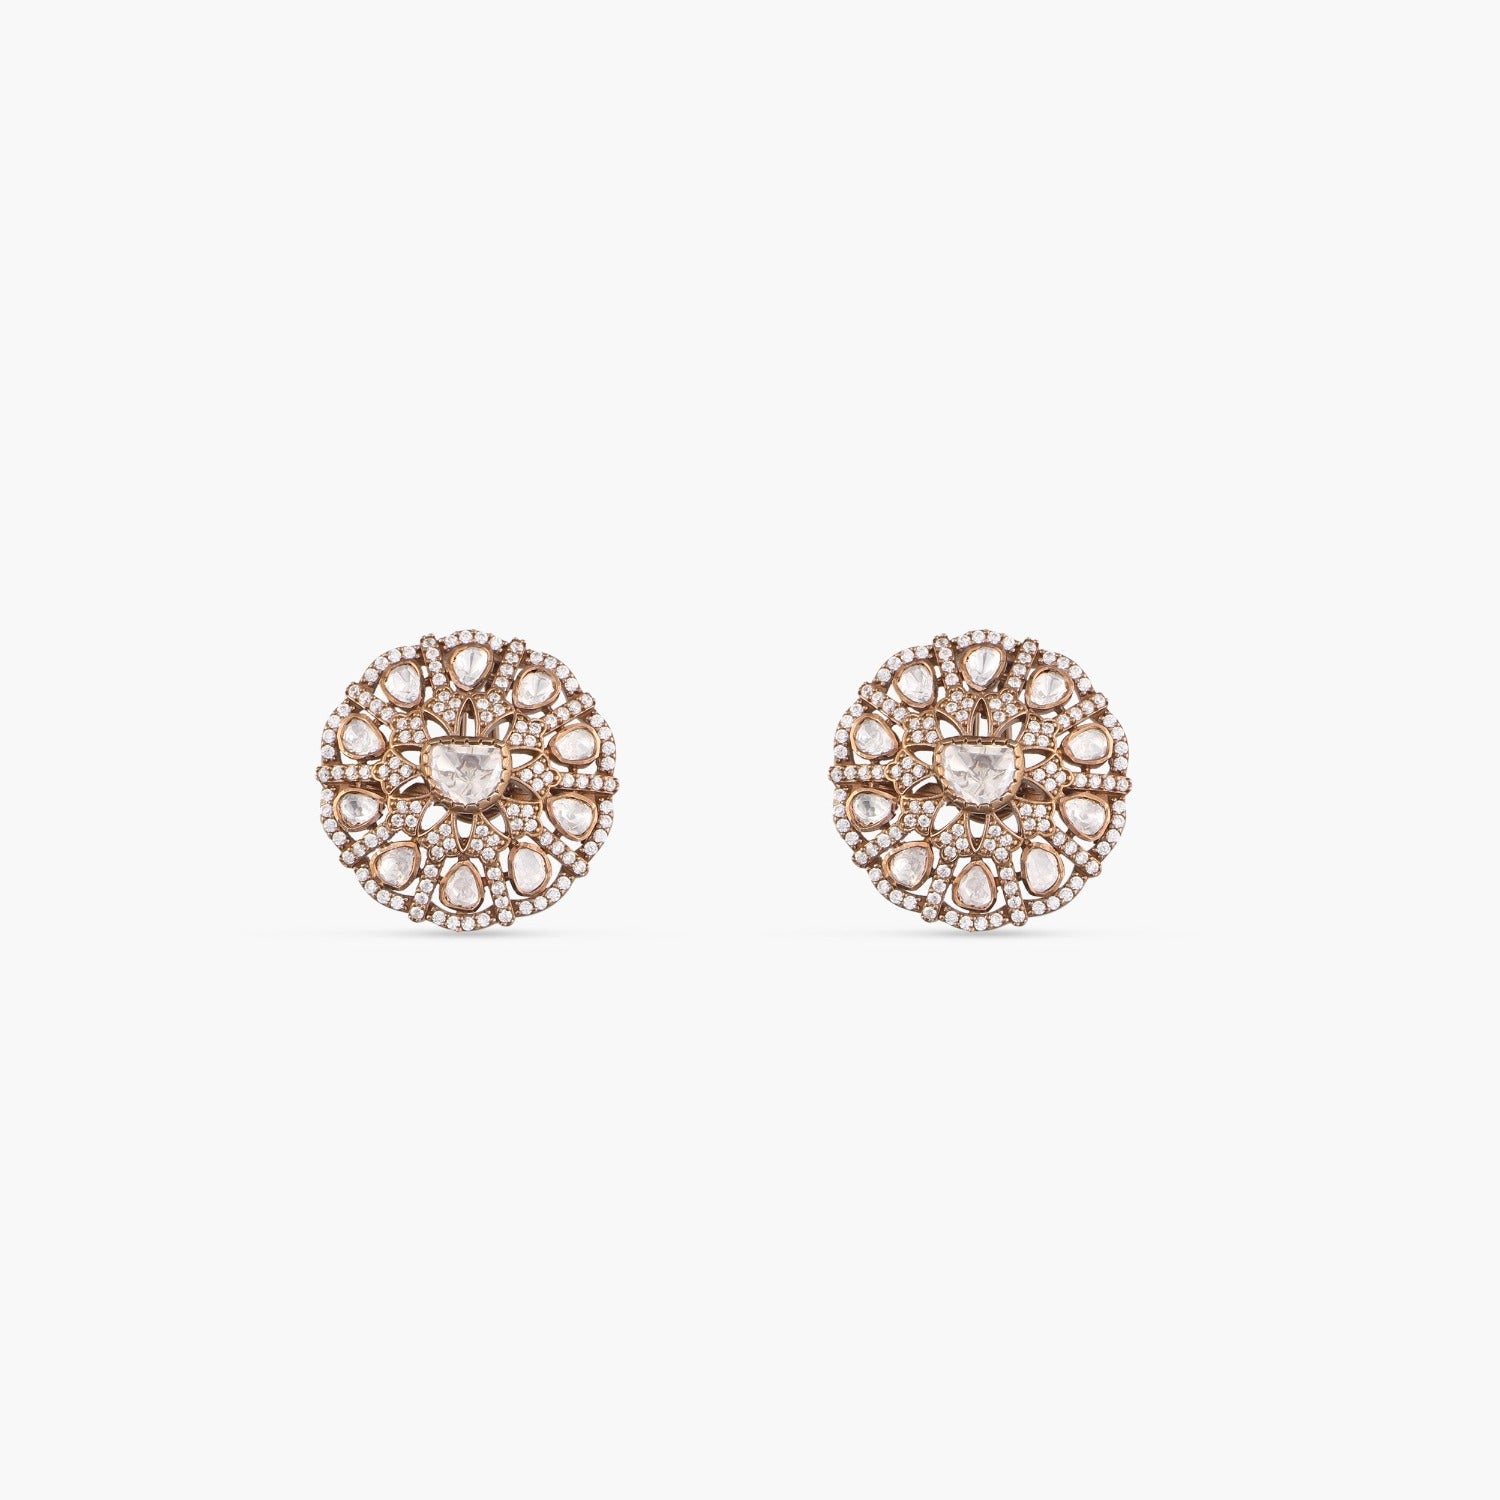 Floral Brilliance Silver Stud Earrings